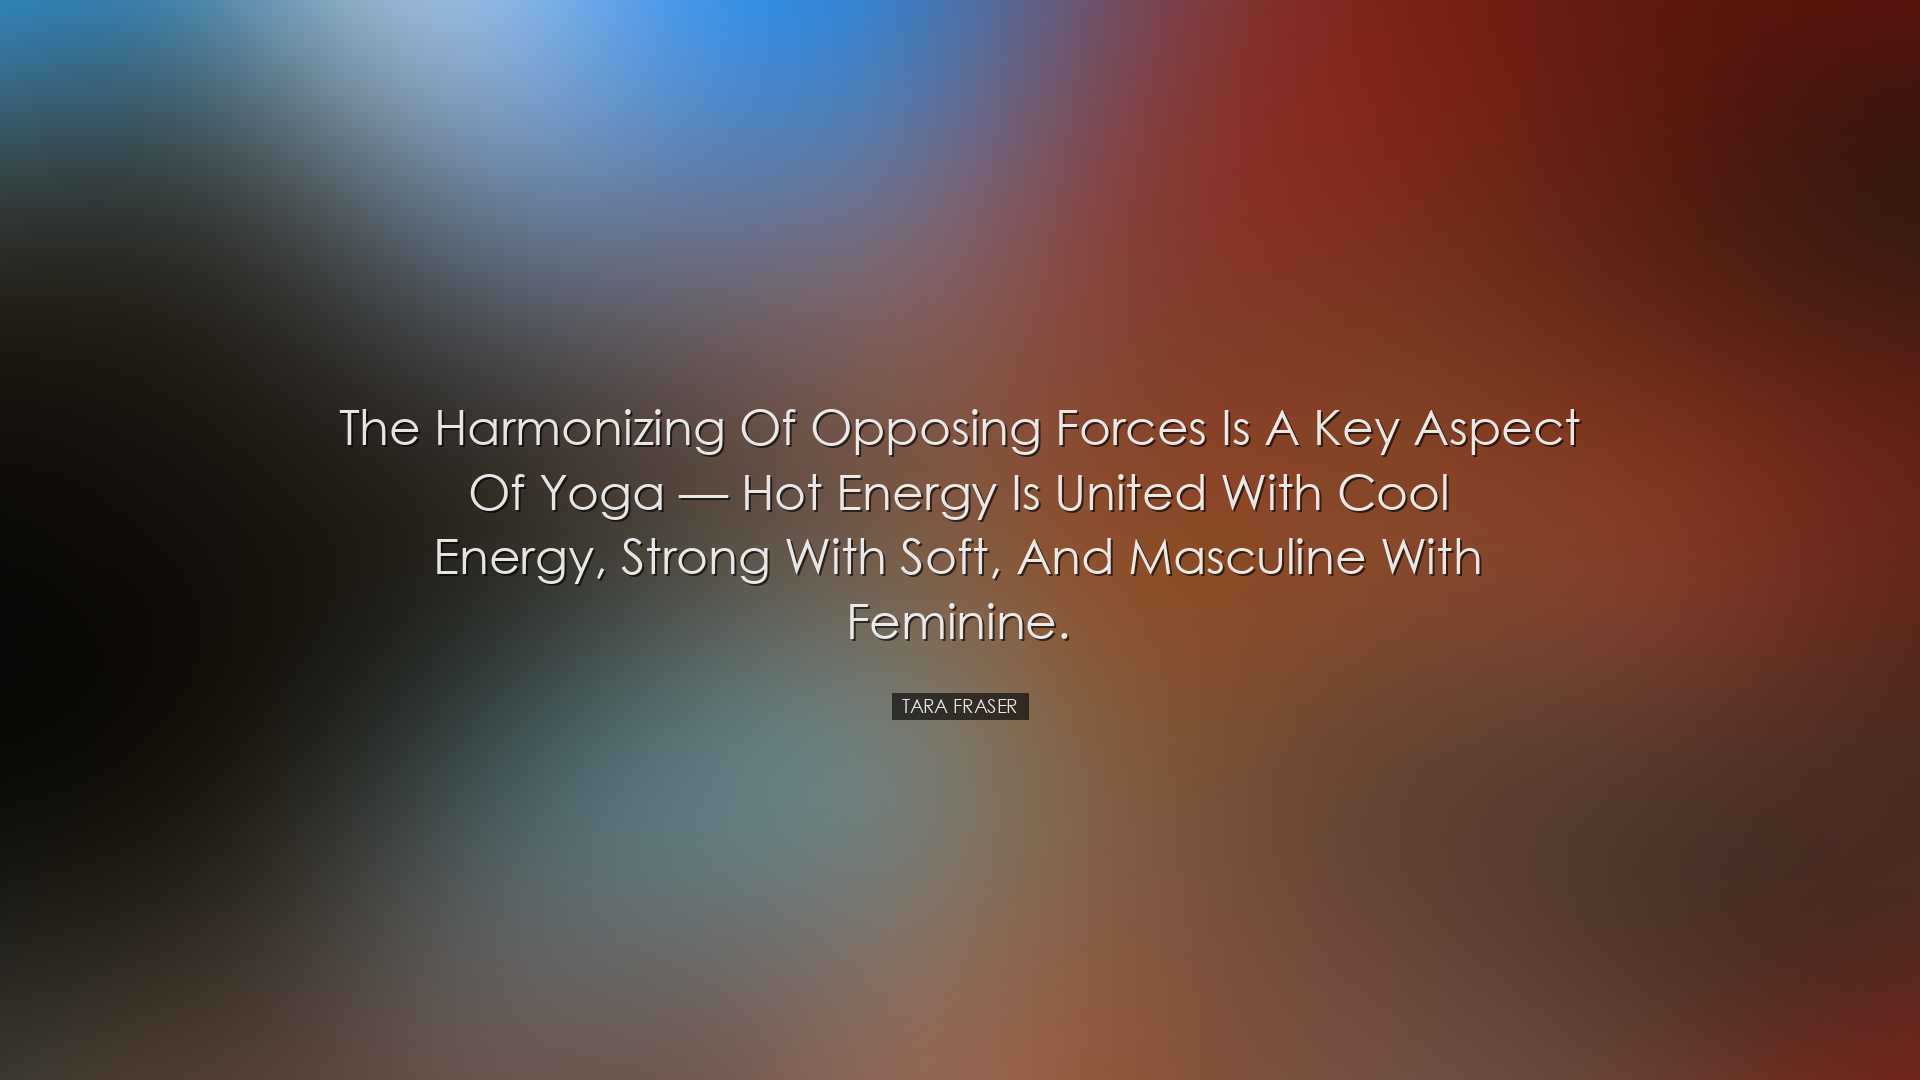 The harmonizing of opposing forces is a key aspect of yoga —